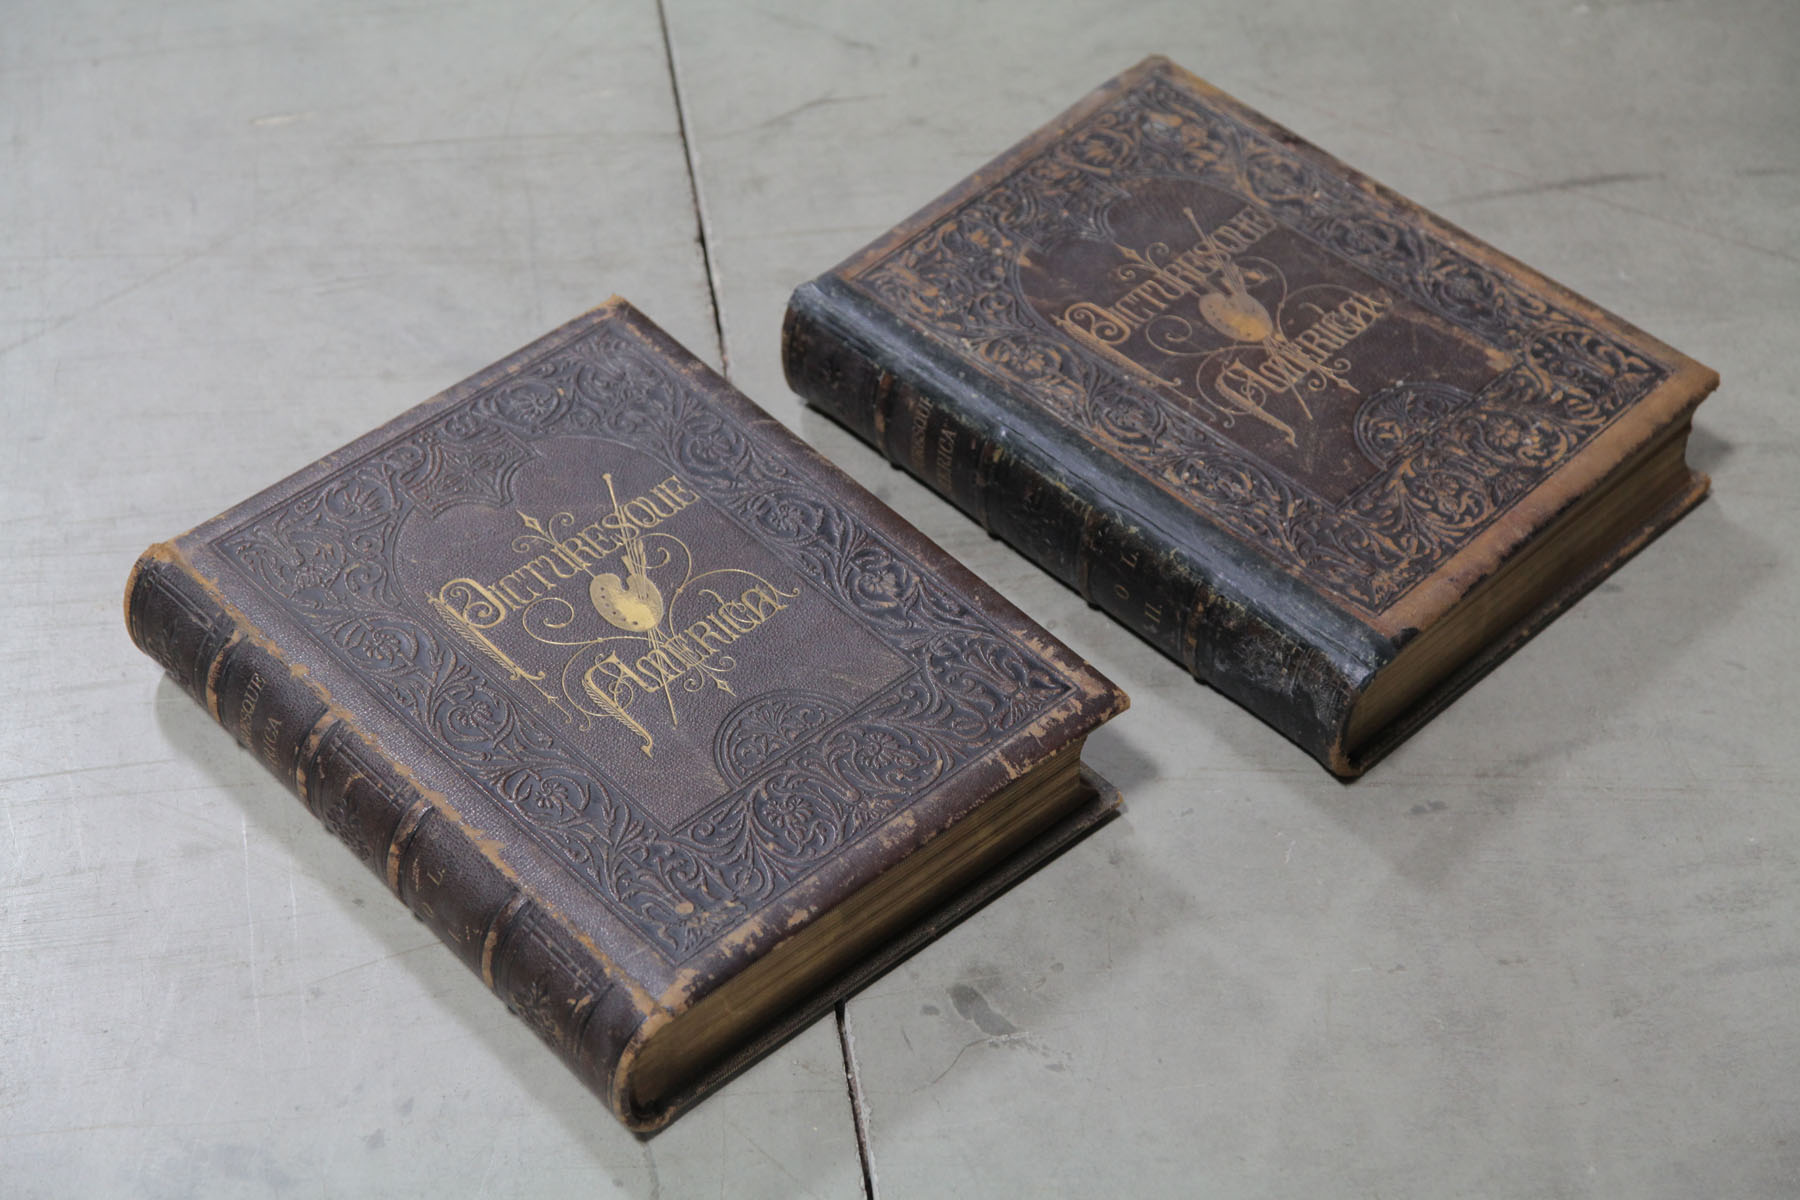 VOLUMES I AND II OF PICTURESQUE